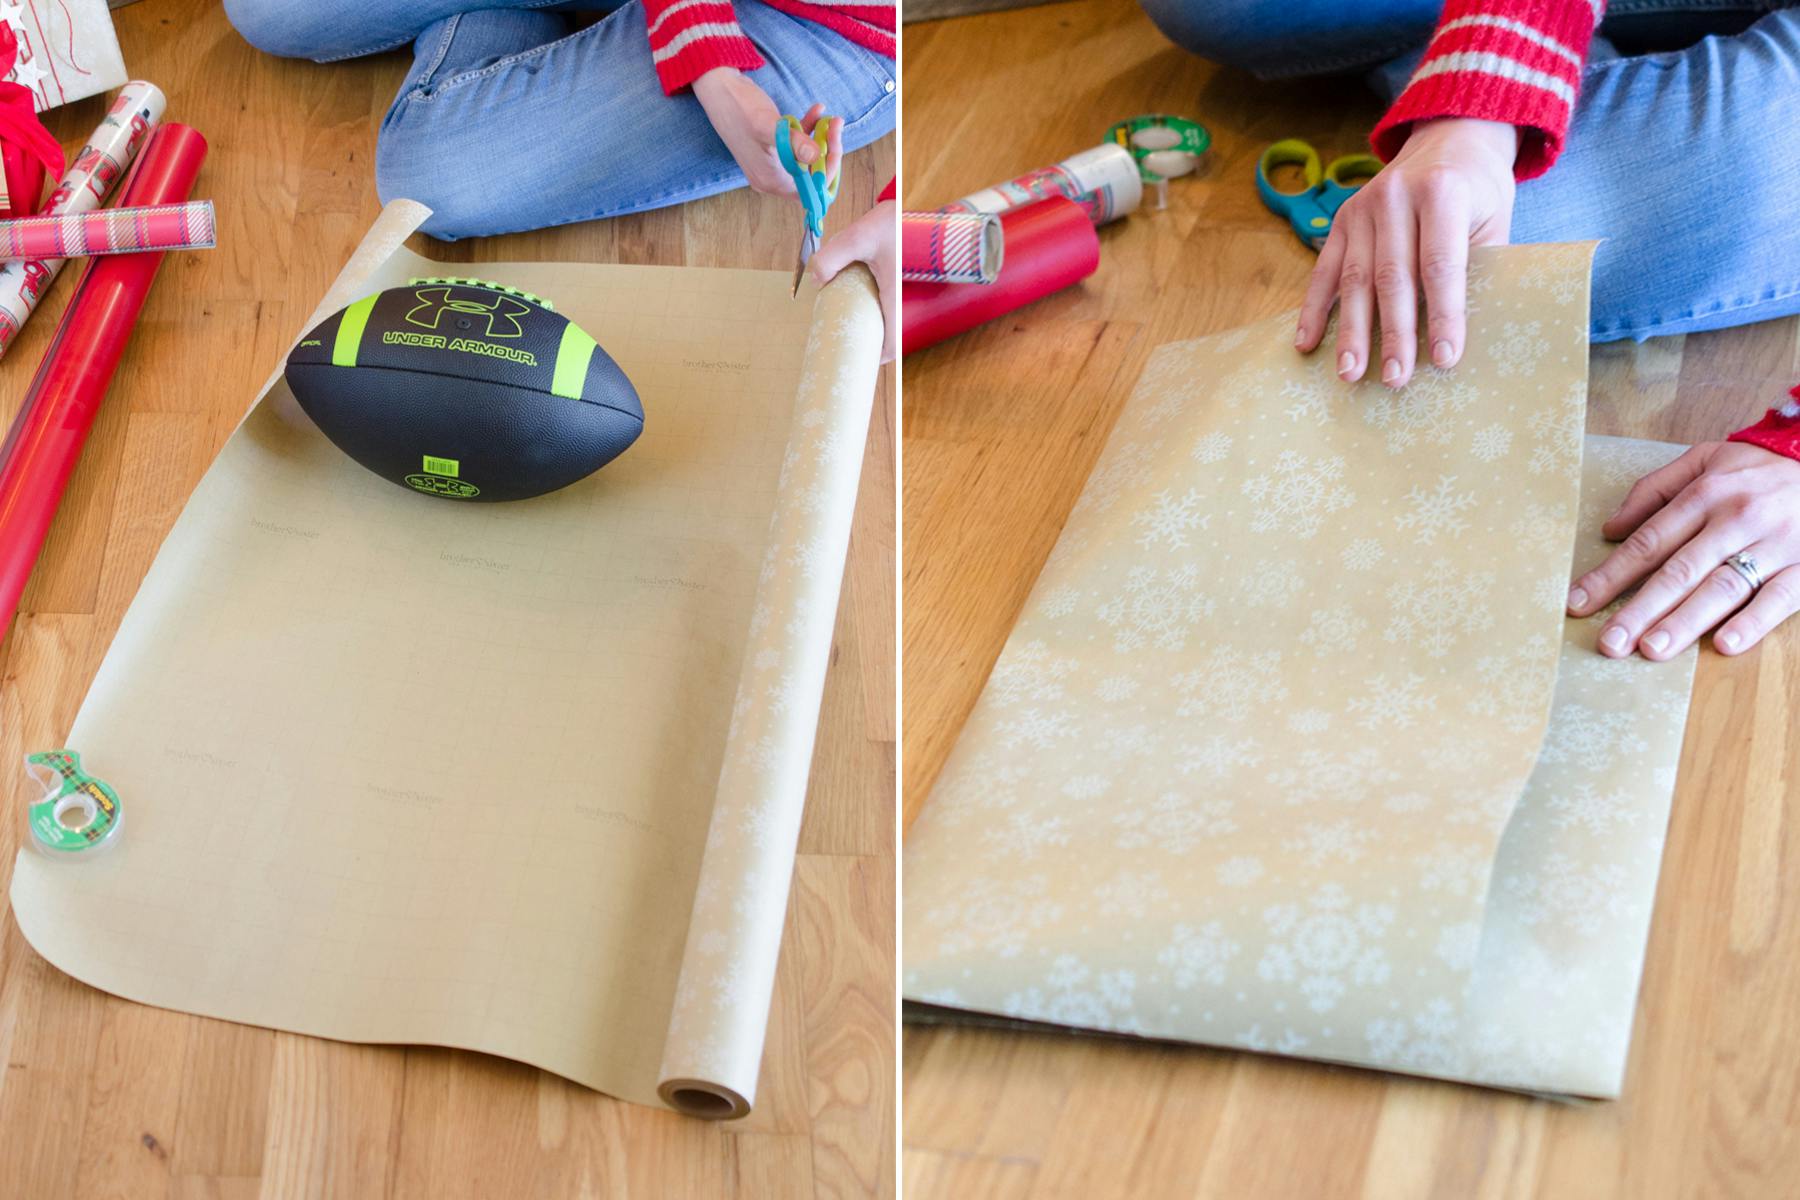 How to Make a Bag Out of Wrapping Paper Like a Pro (+ Video)